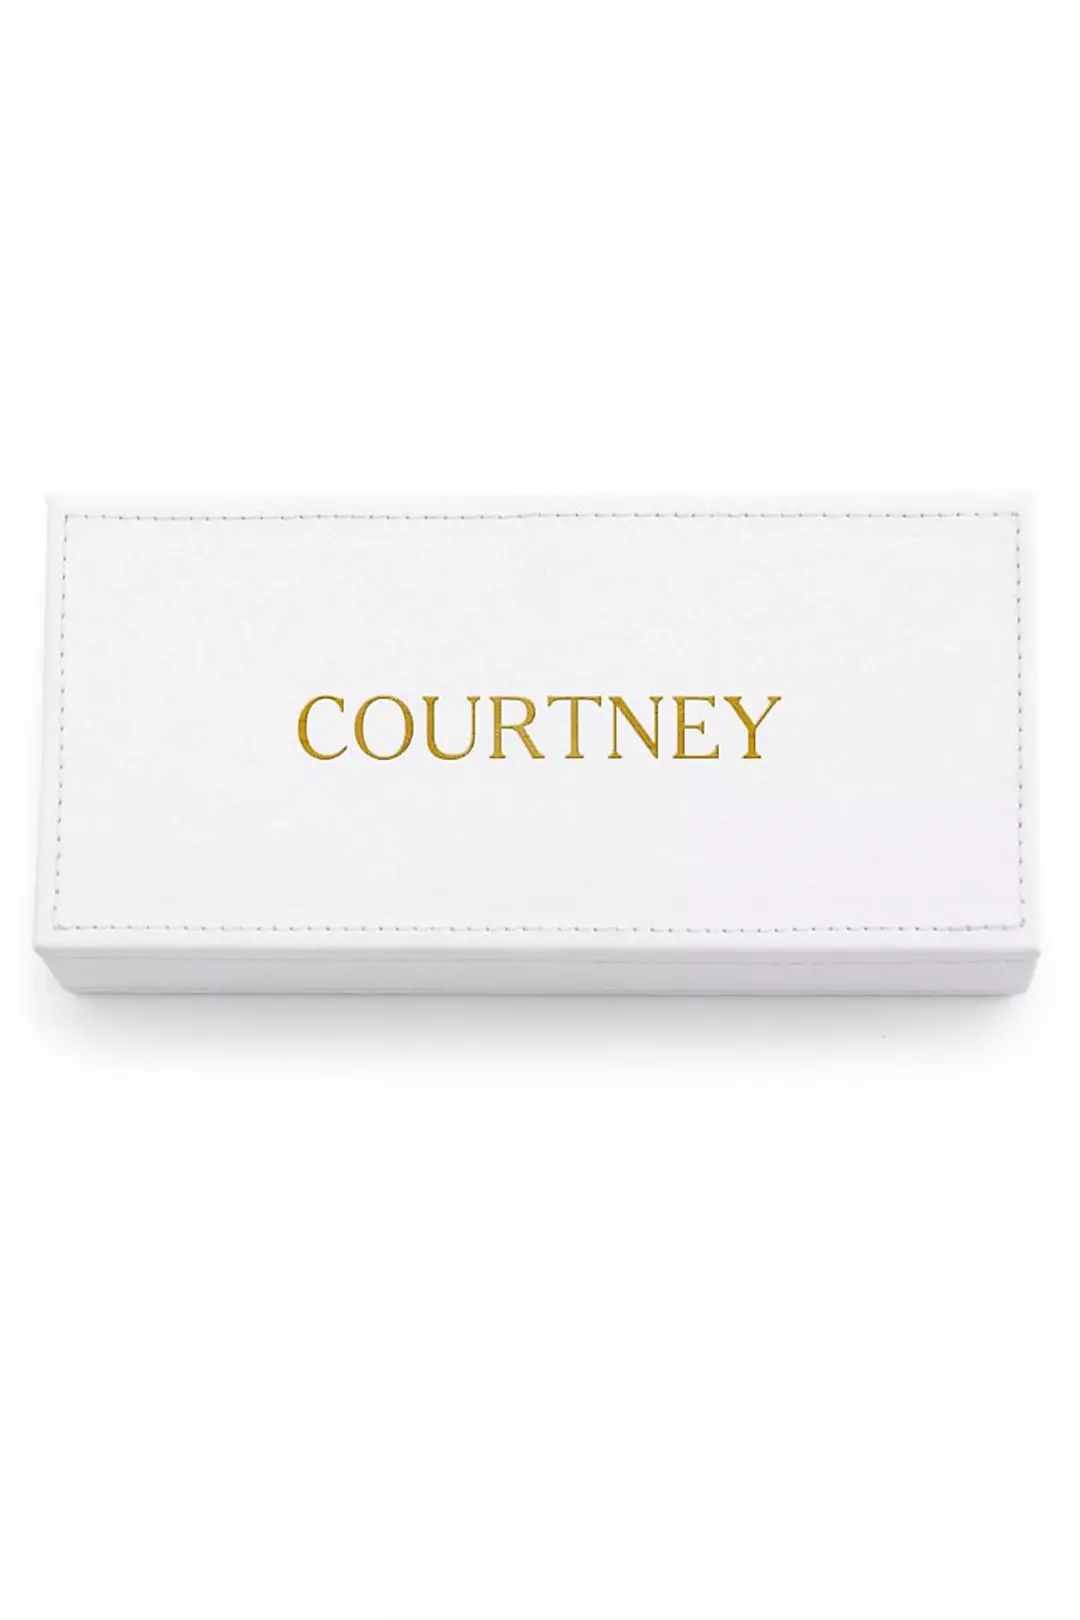 Personalized Name Vegan Leather Jewelry Box Image